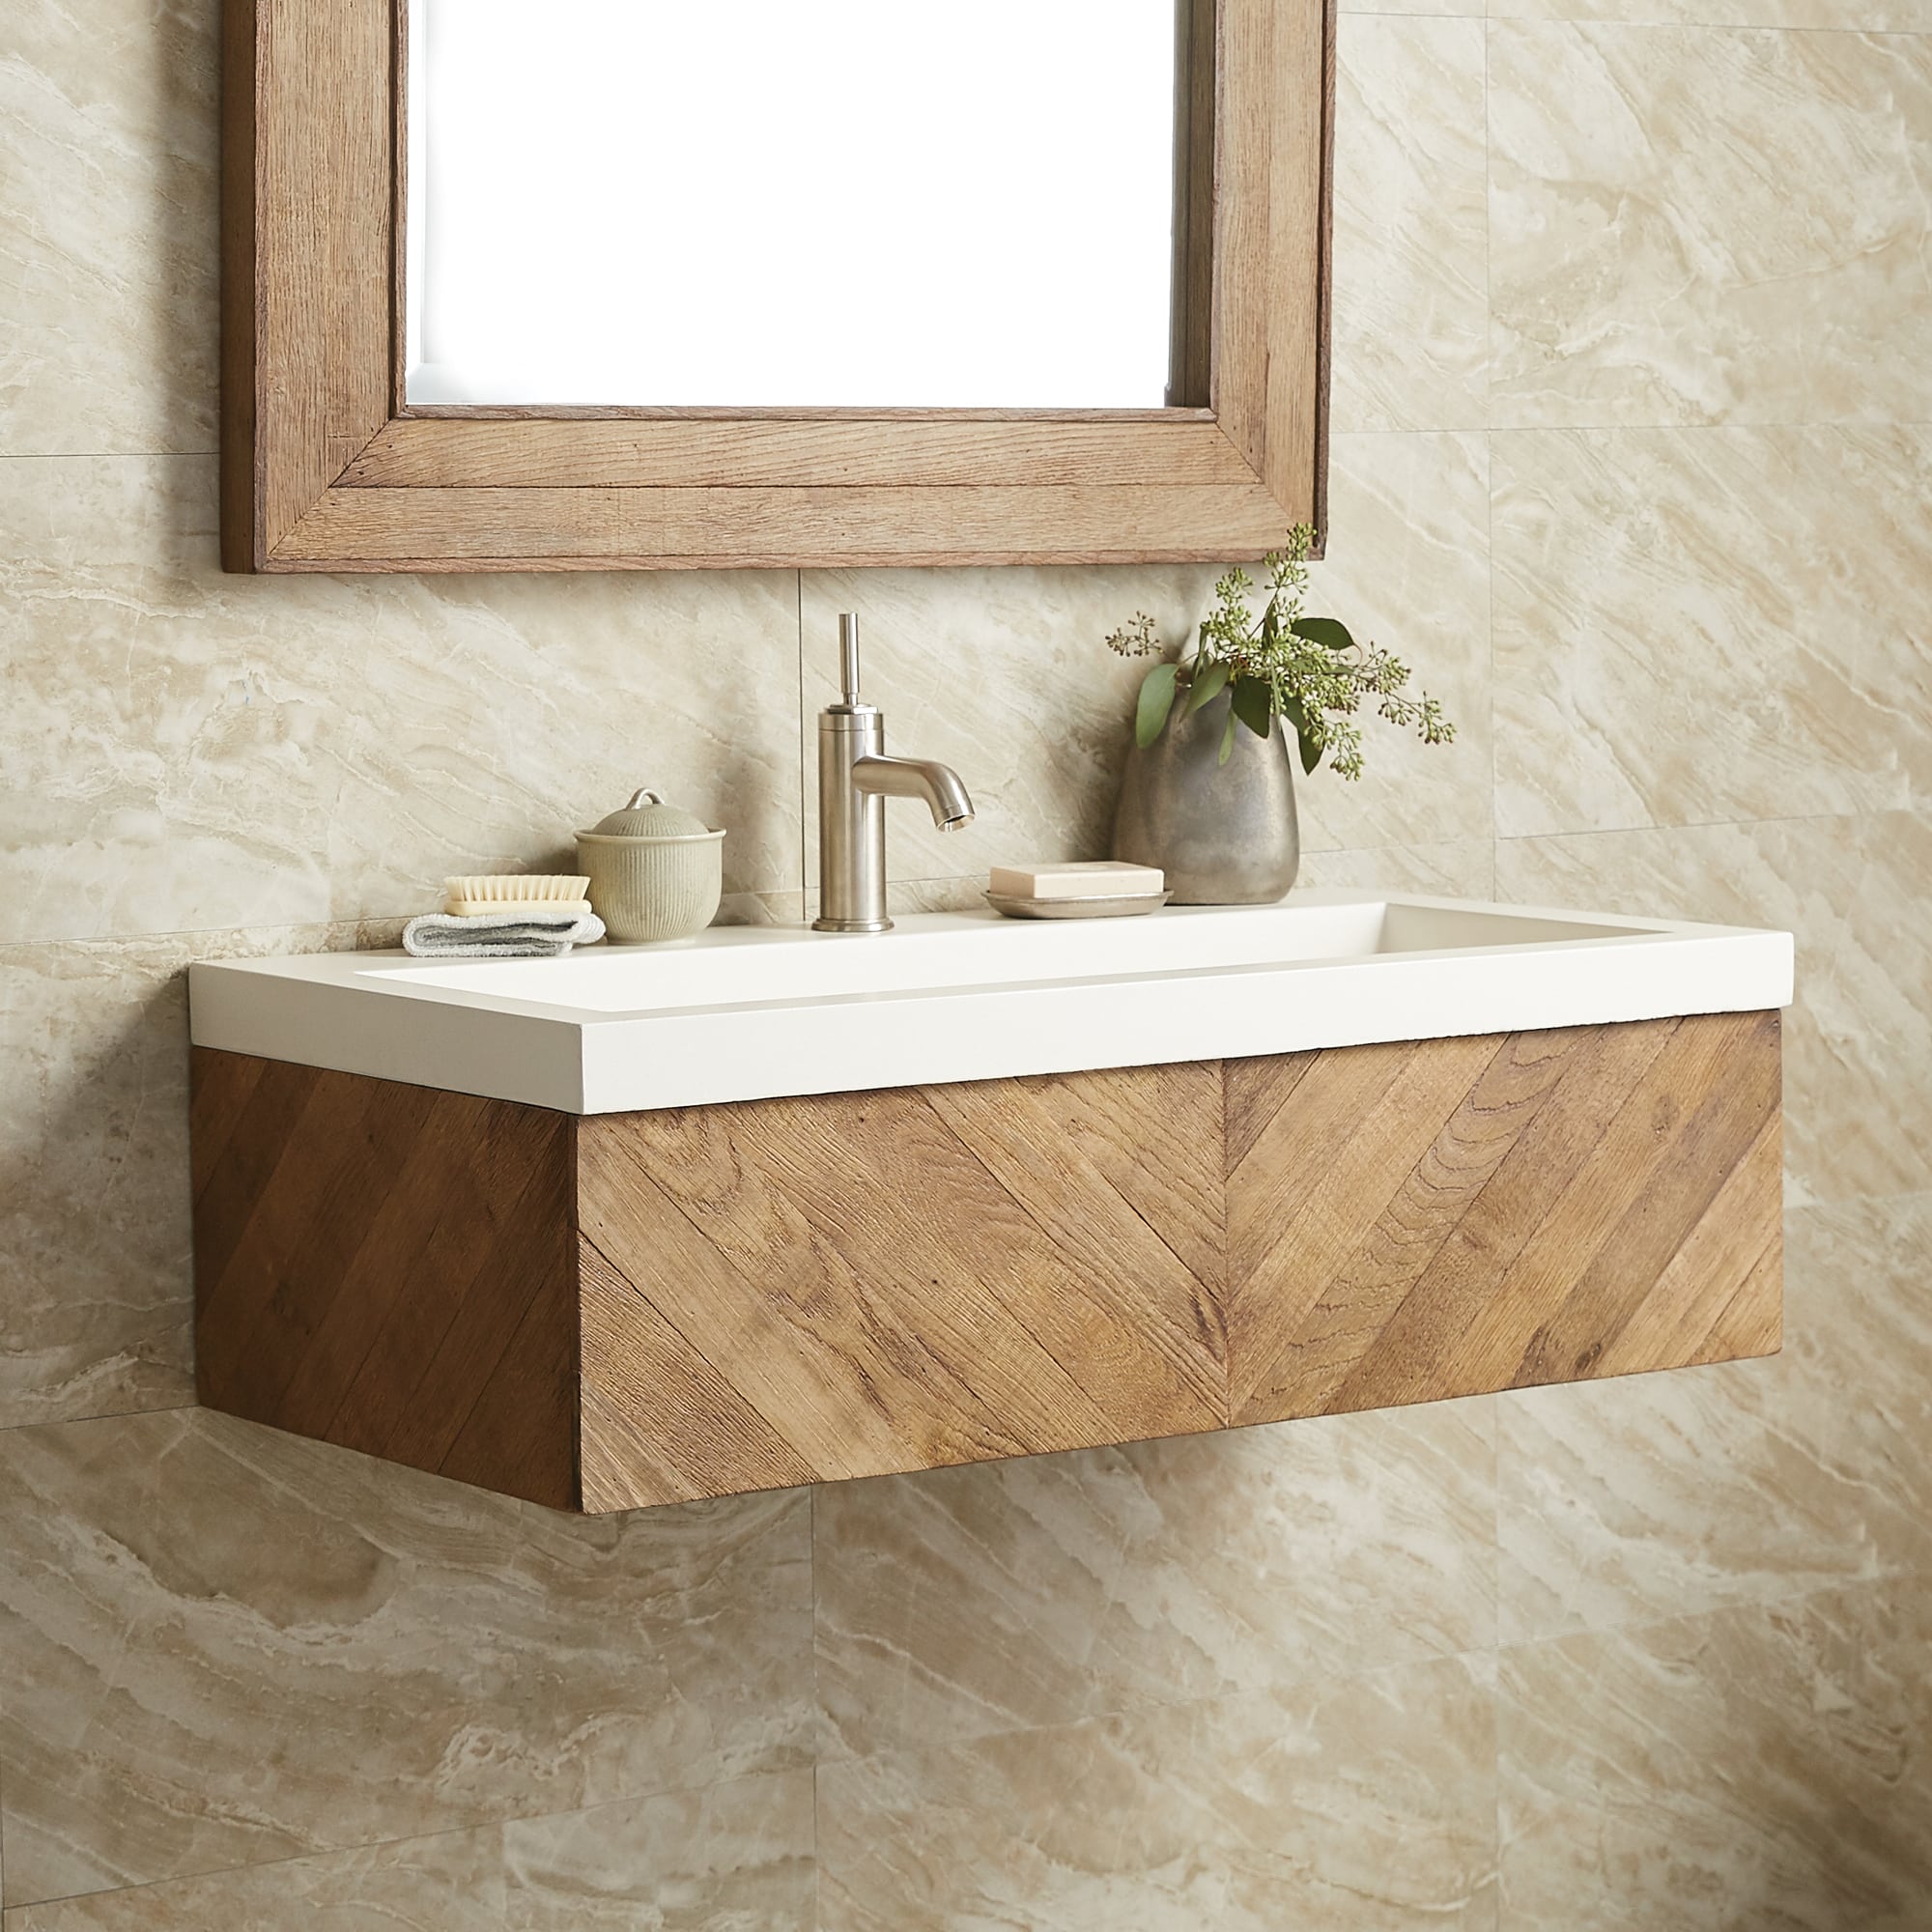 Native Trails 36 inch Chardonnay Floating Vanity with NativeStone Trough Sink in Pearl, VNW191-NSL3619-P